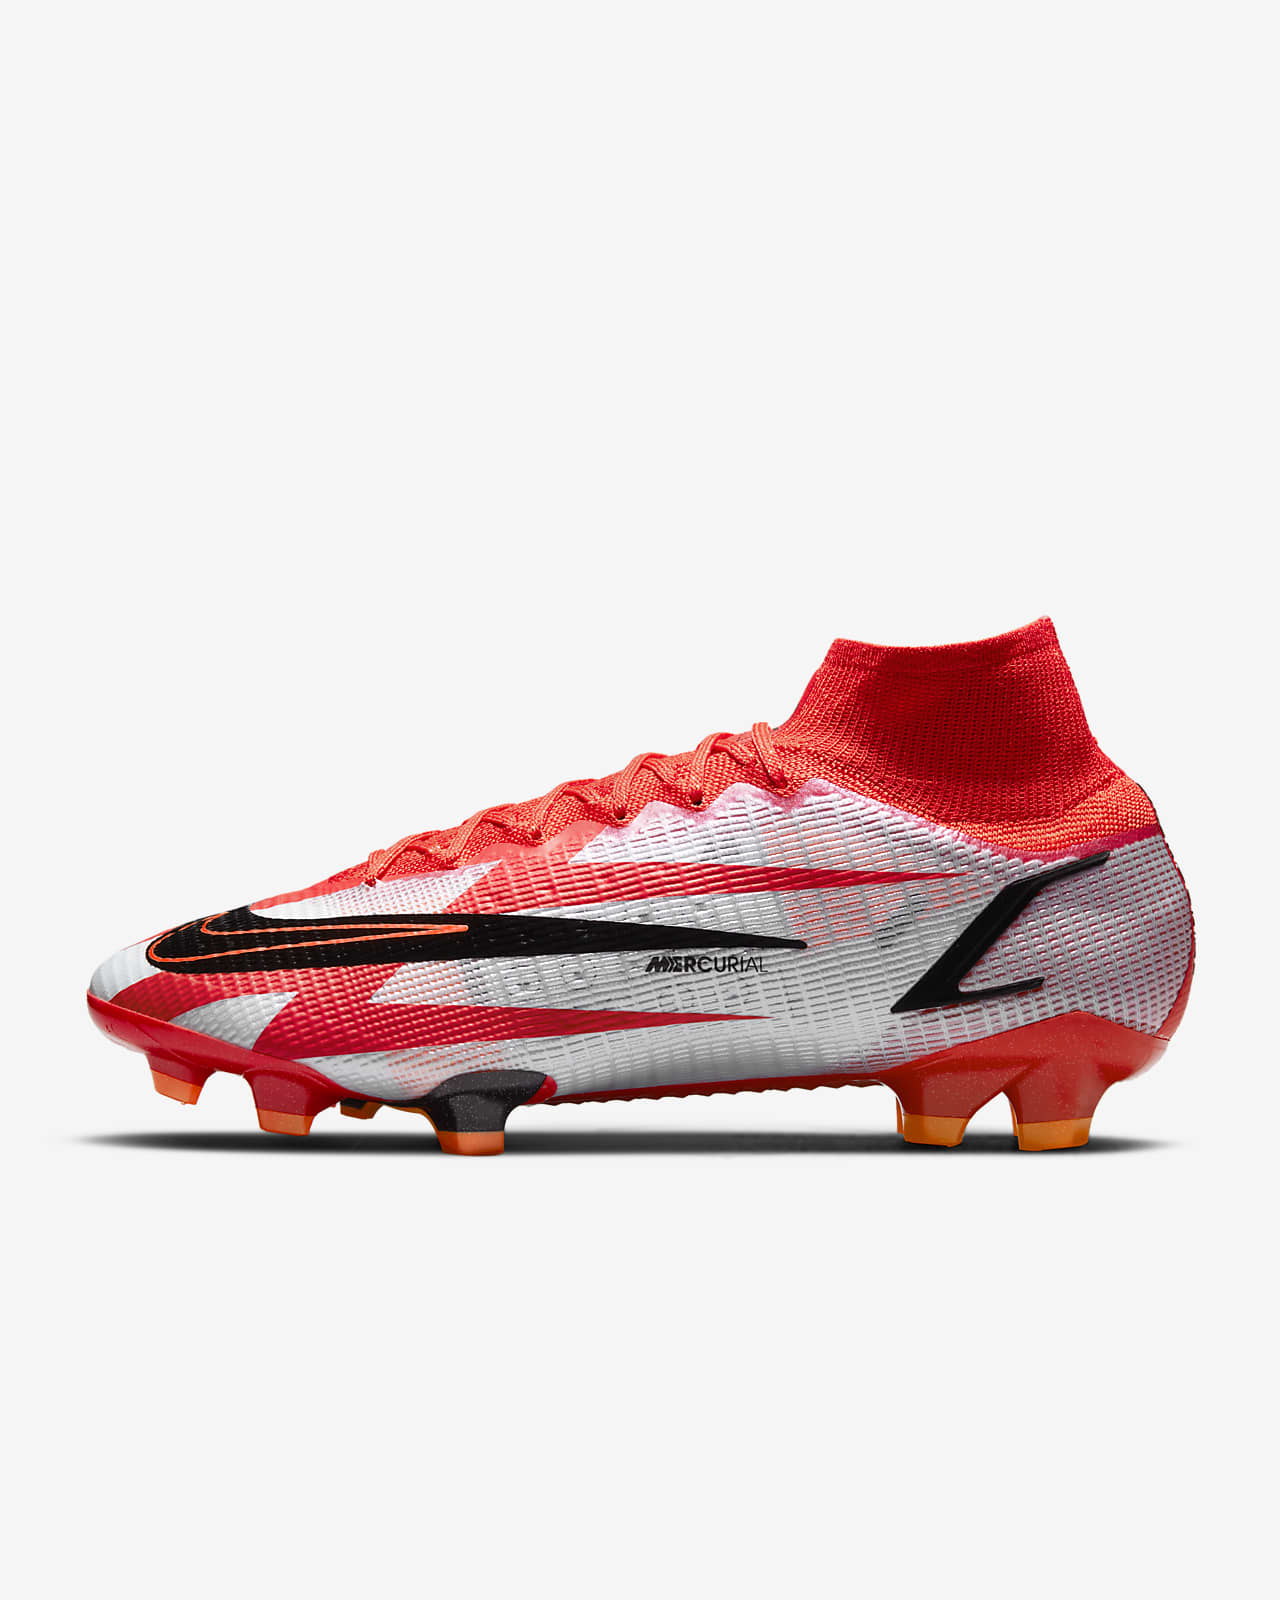 de cr7 2021 Today's Deals- OFF-69% >Free Delivery